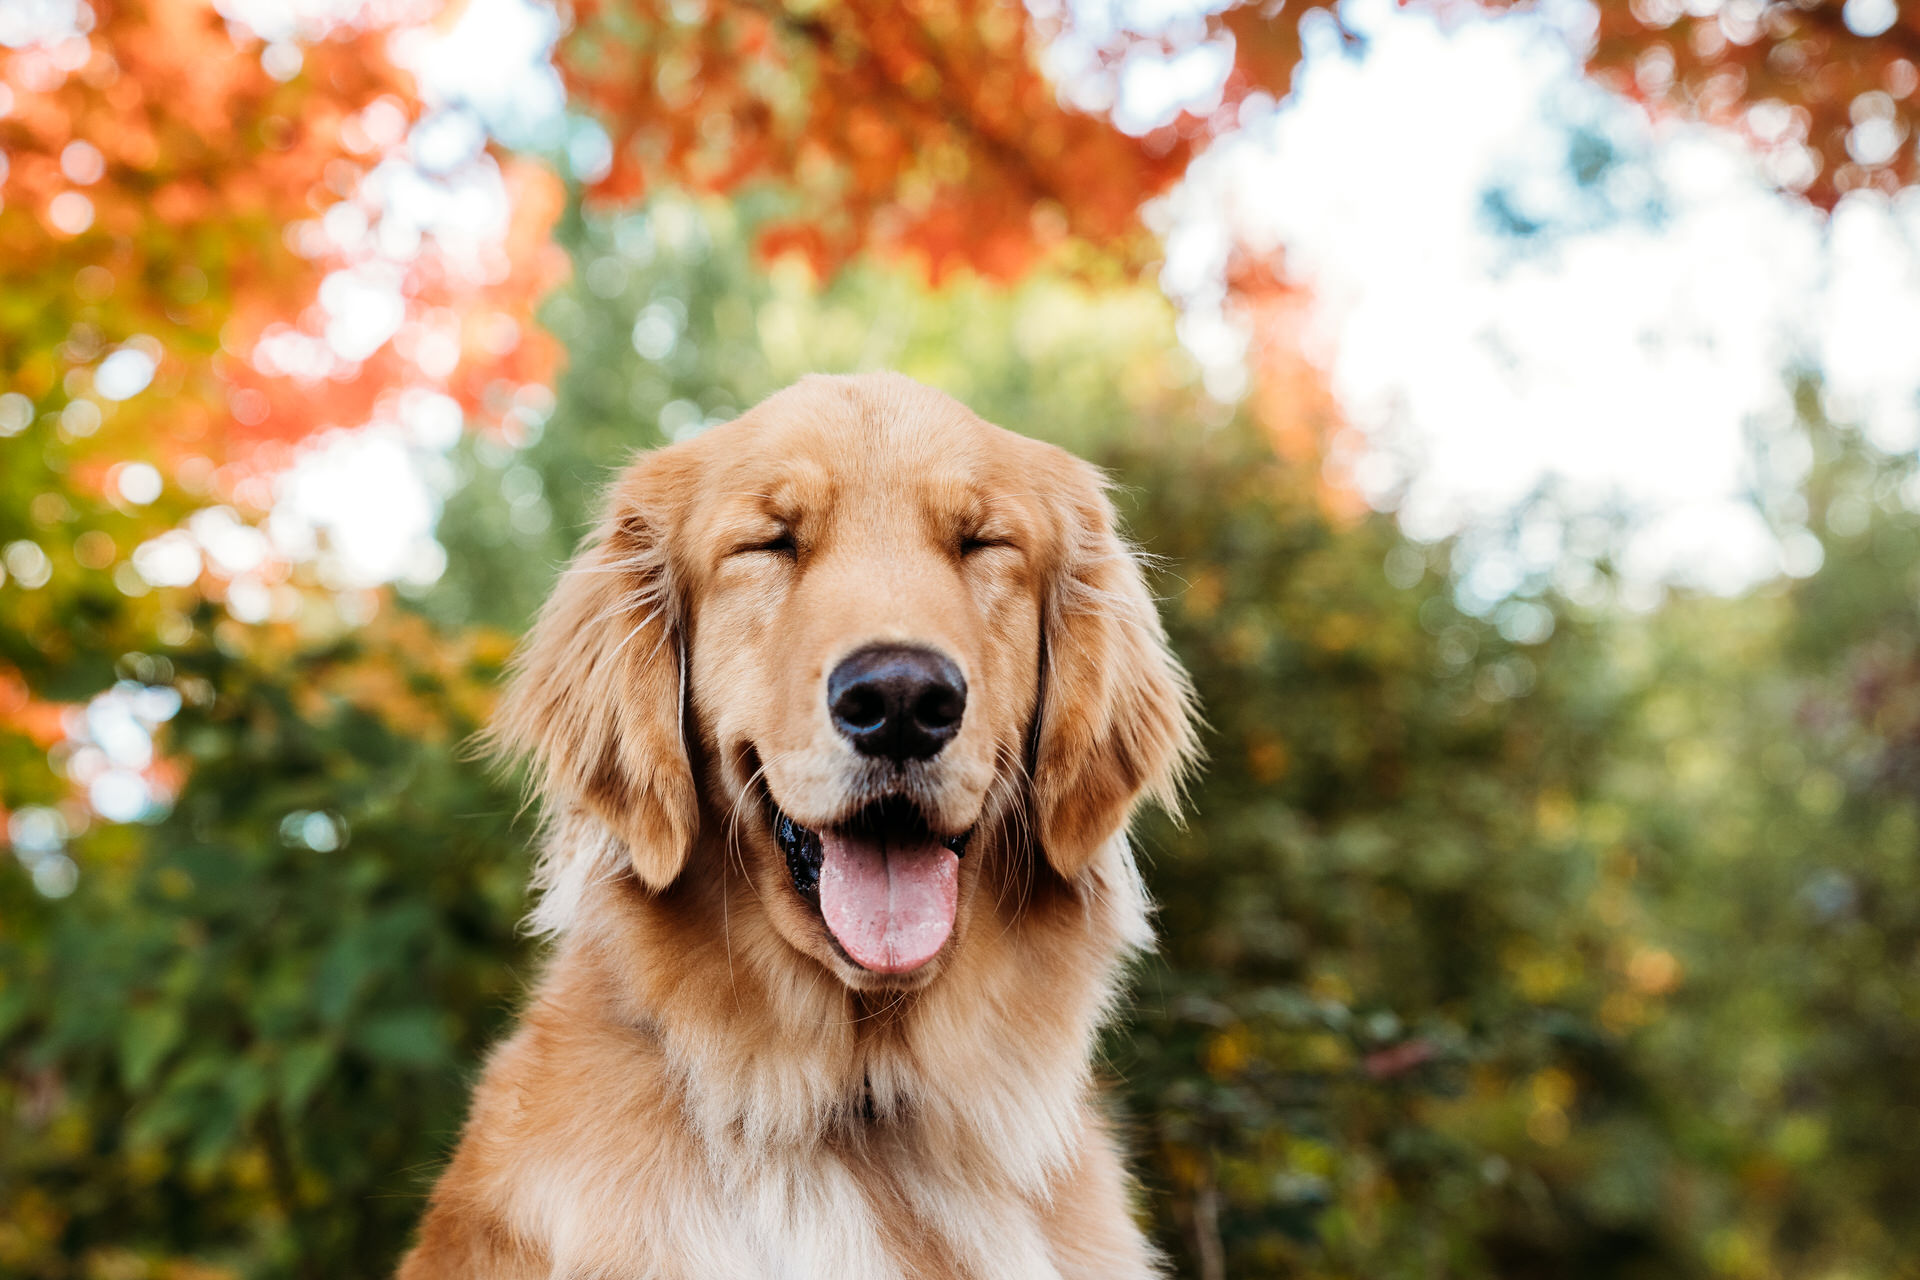 golden retriever smiles with his eyes closed